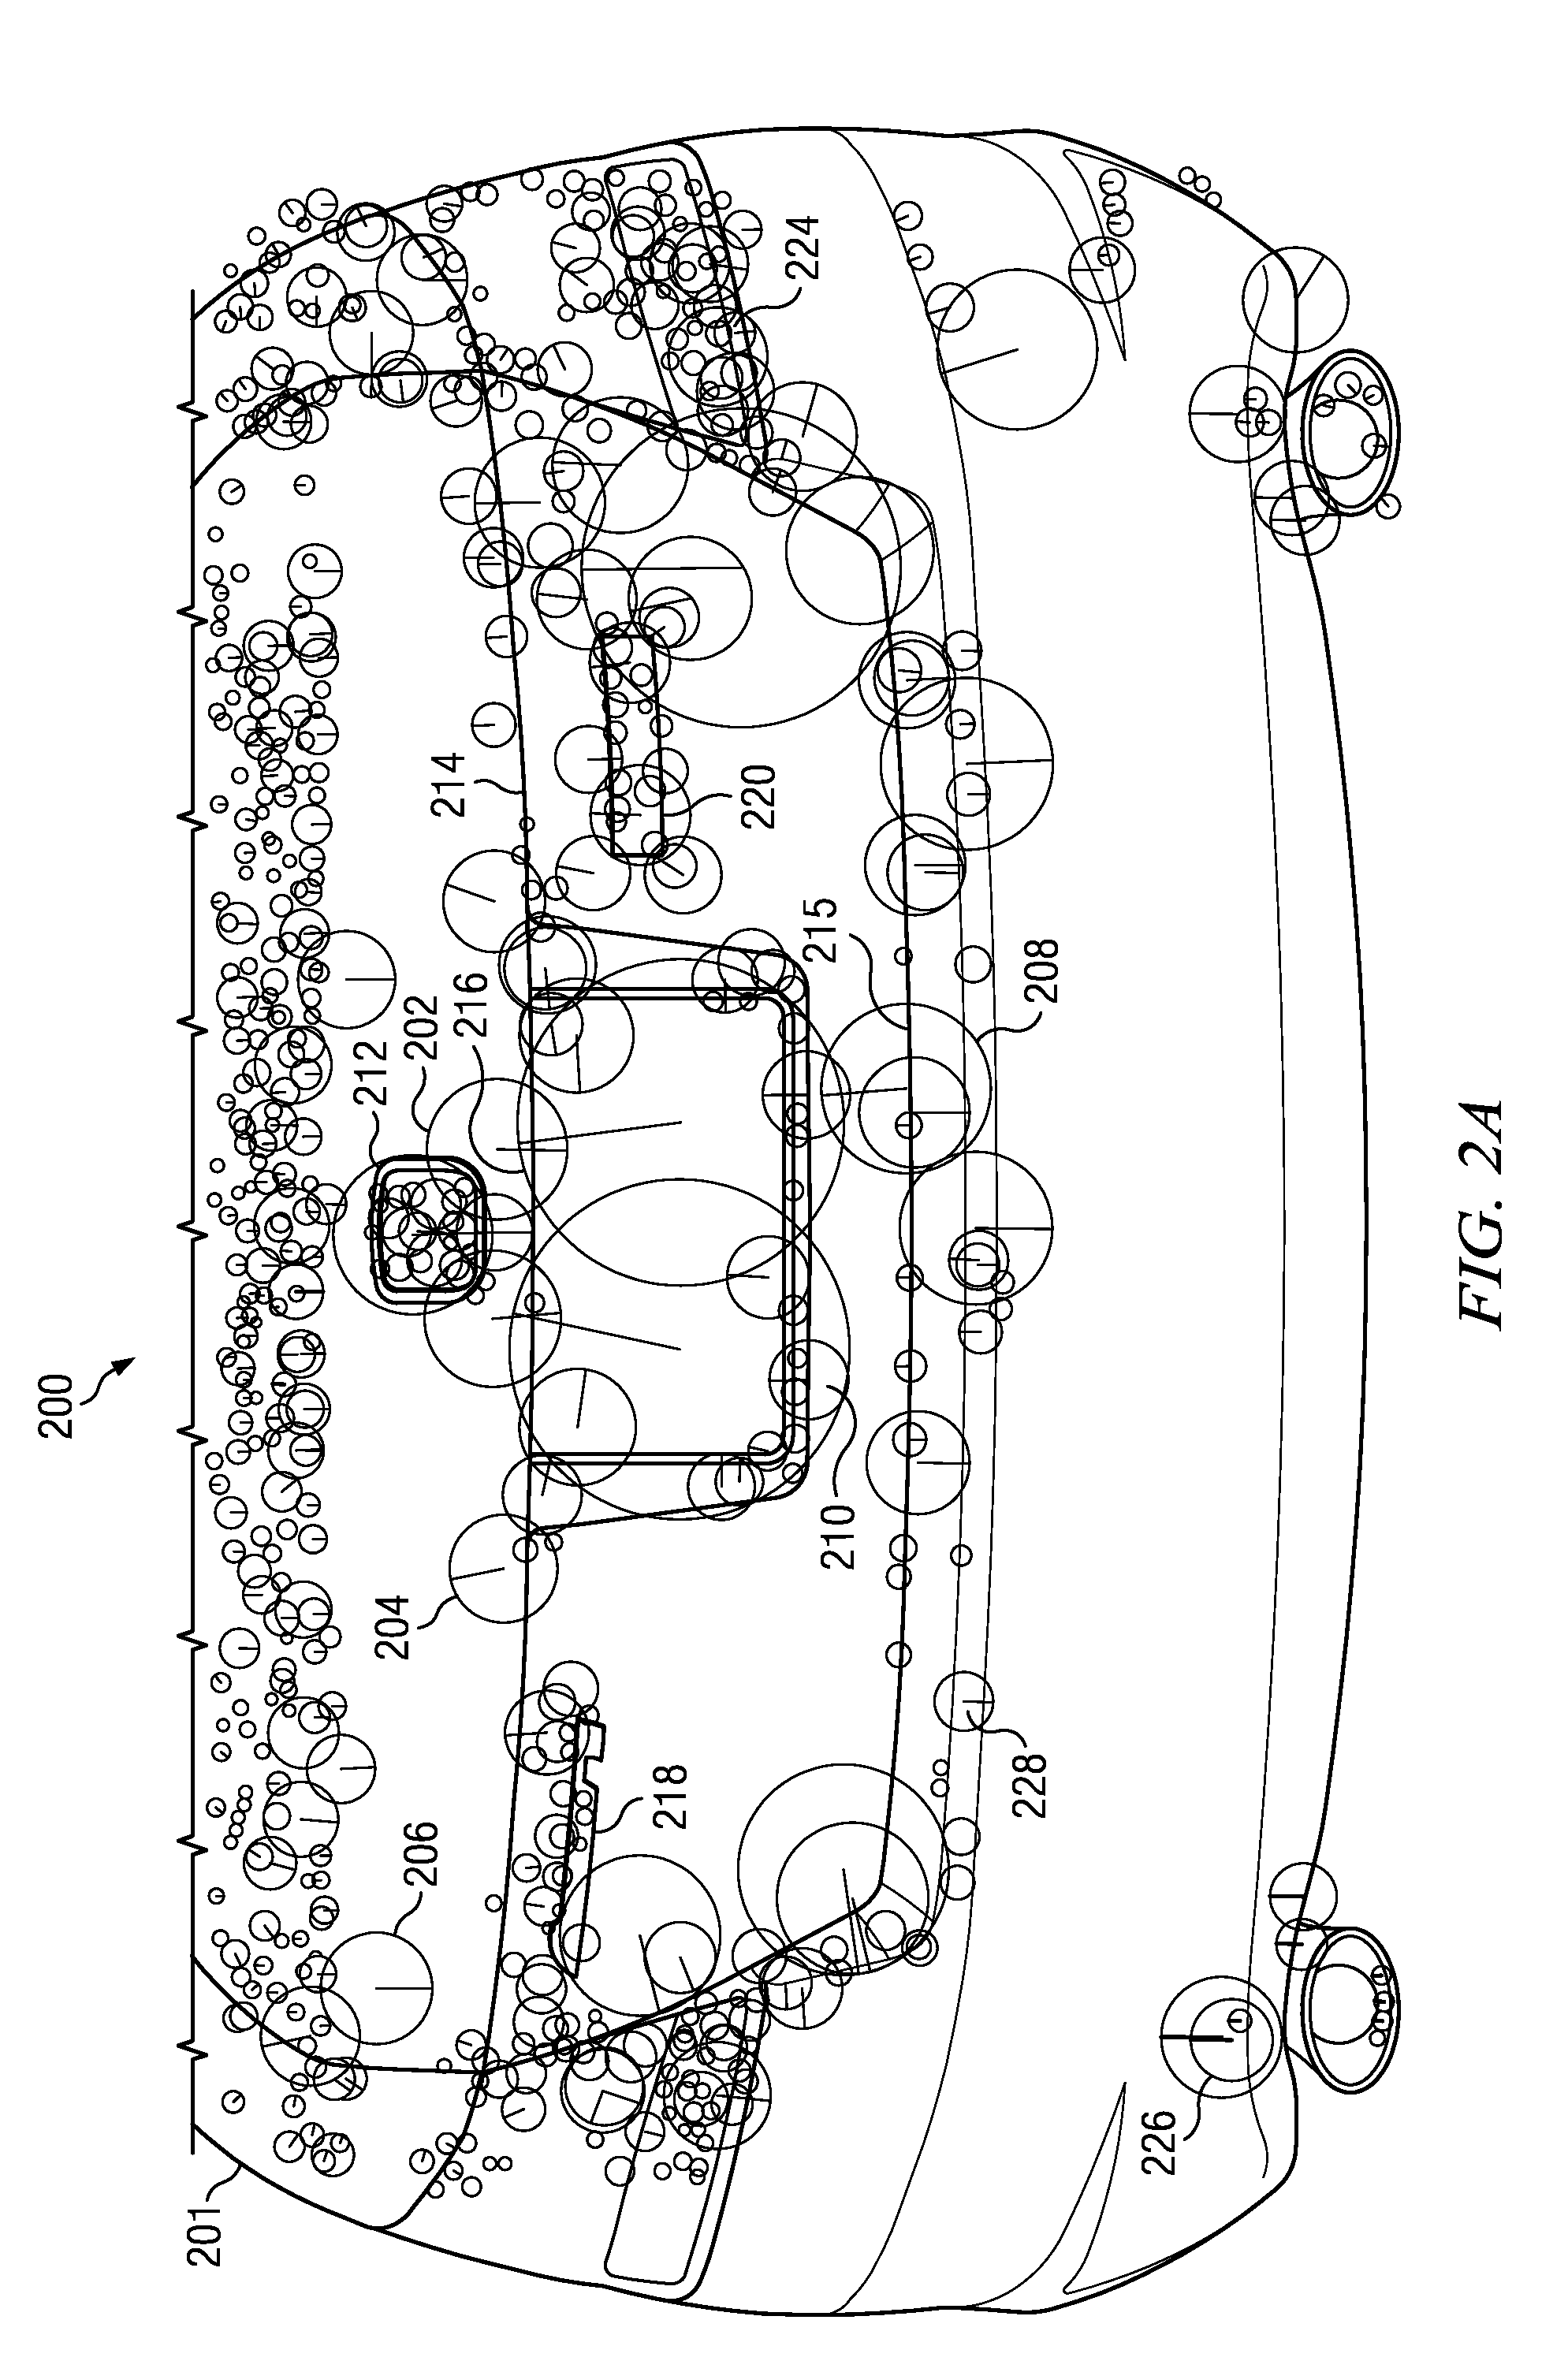 System and method for providing automotive purchase, insurance quote, and vehicle financing information using vehicle recognition